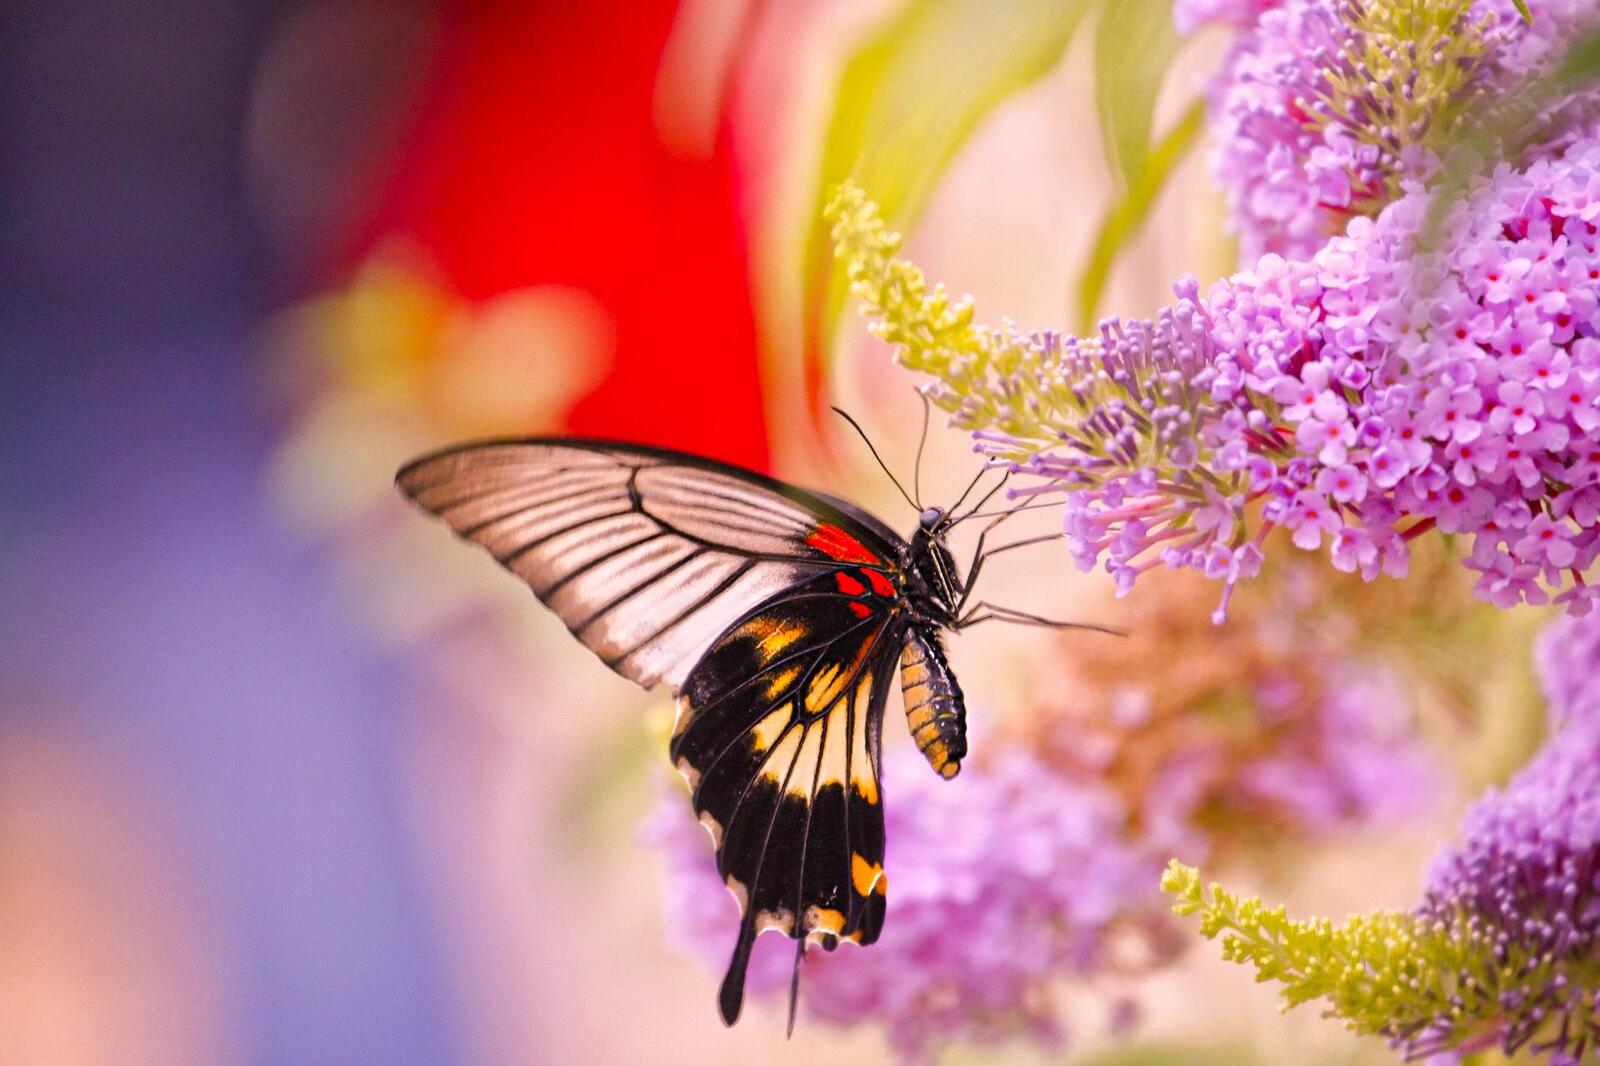 Wallpapers flowers butterfly insect on the desktop